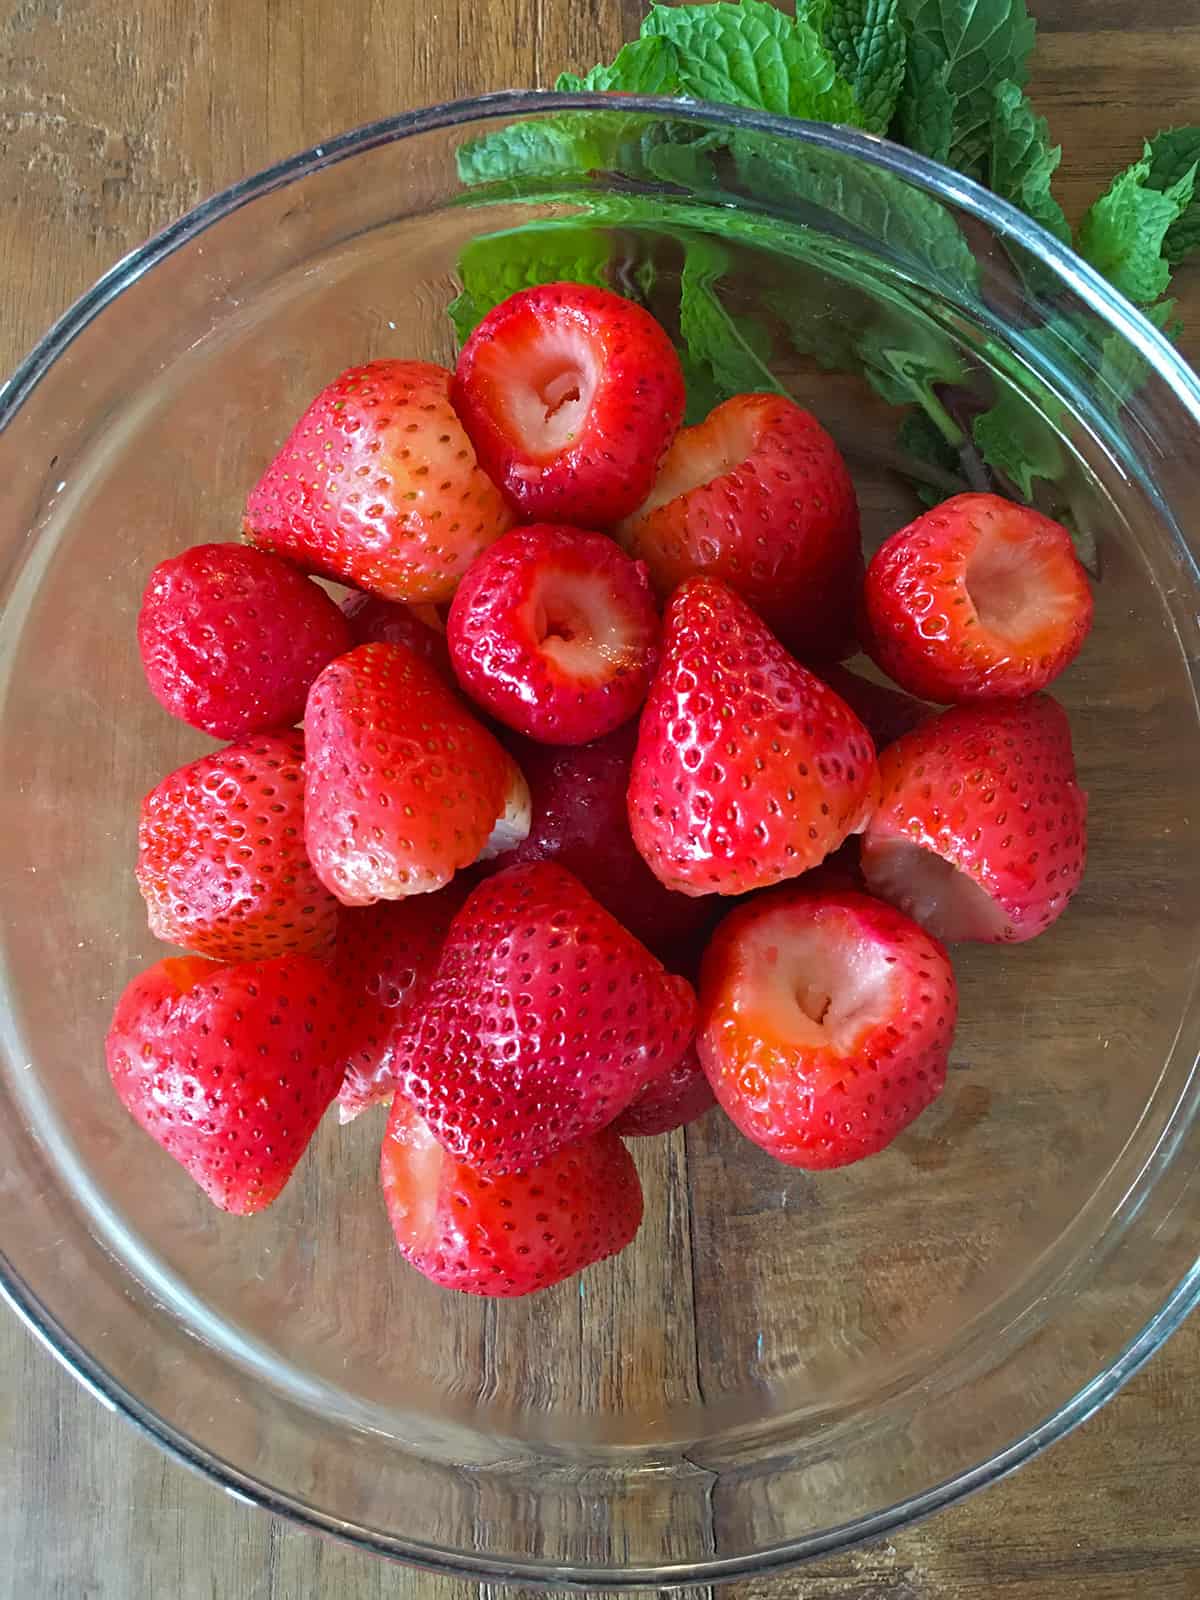 Washed and trimmed fresh strawberries in a glass mixing bowl